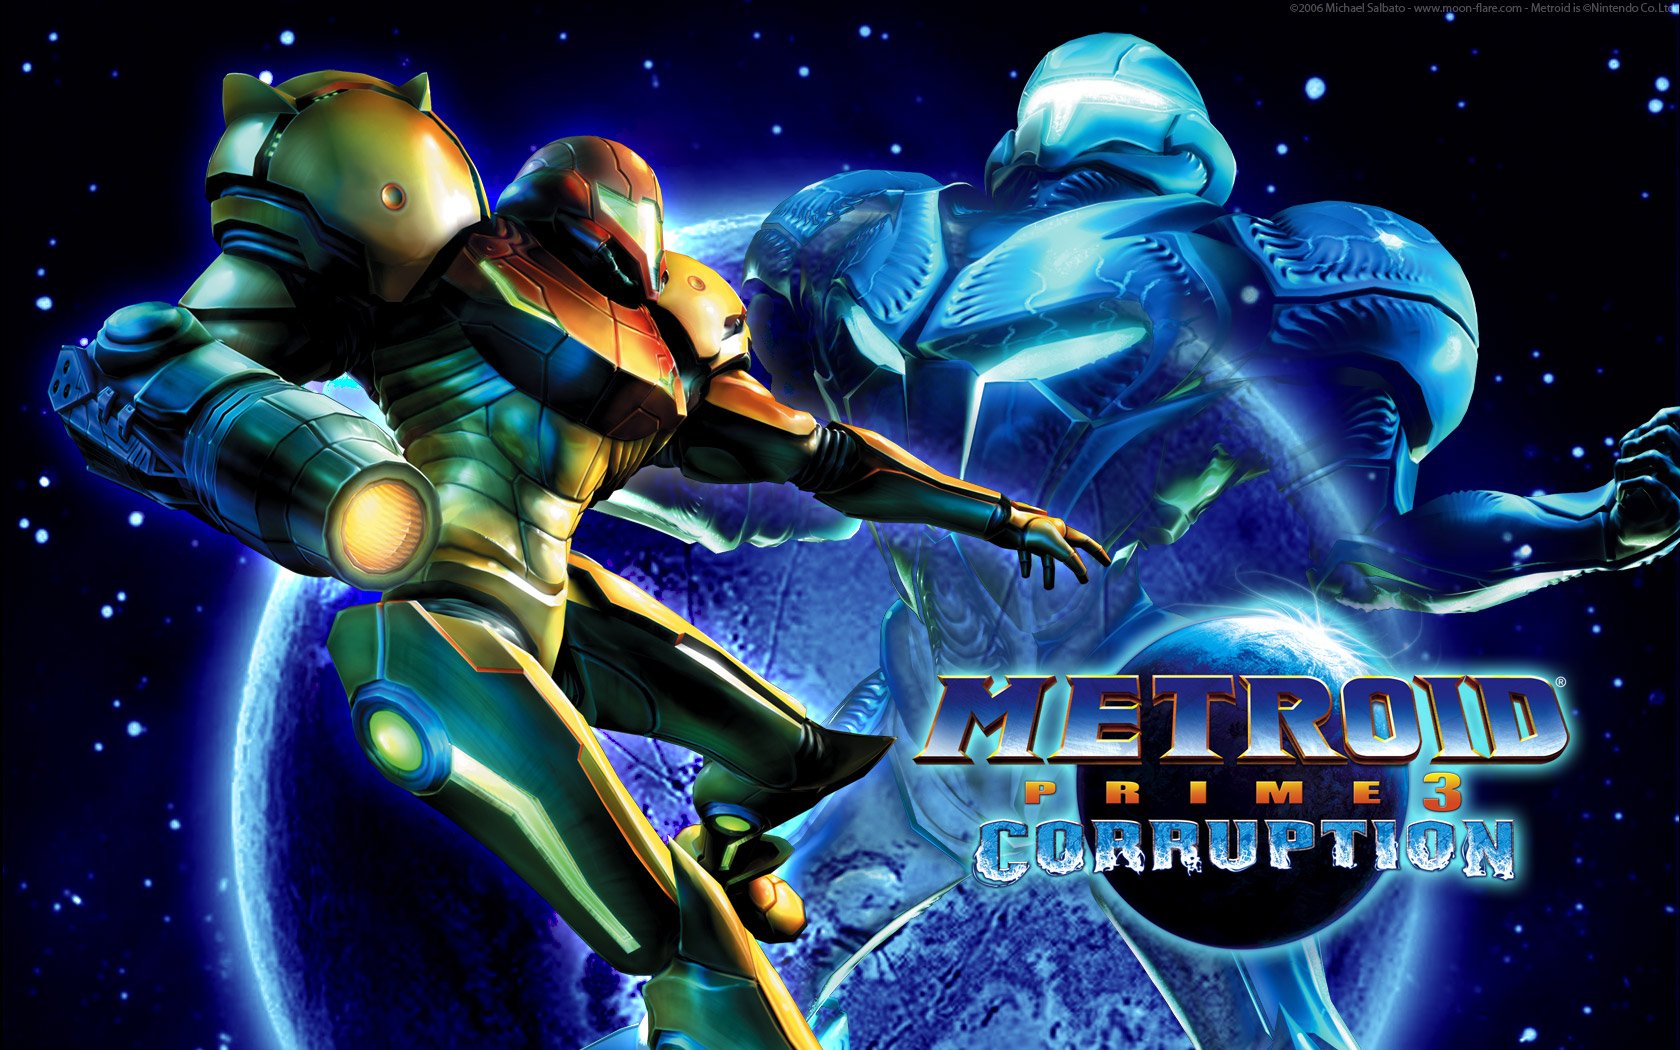 metroid prime remastered for wii